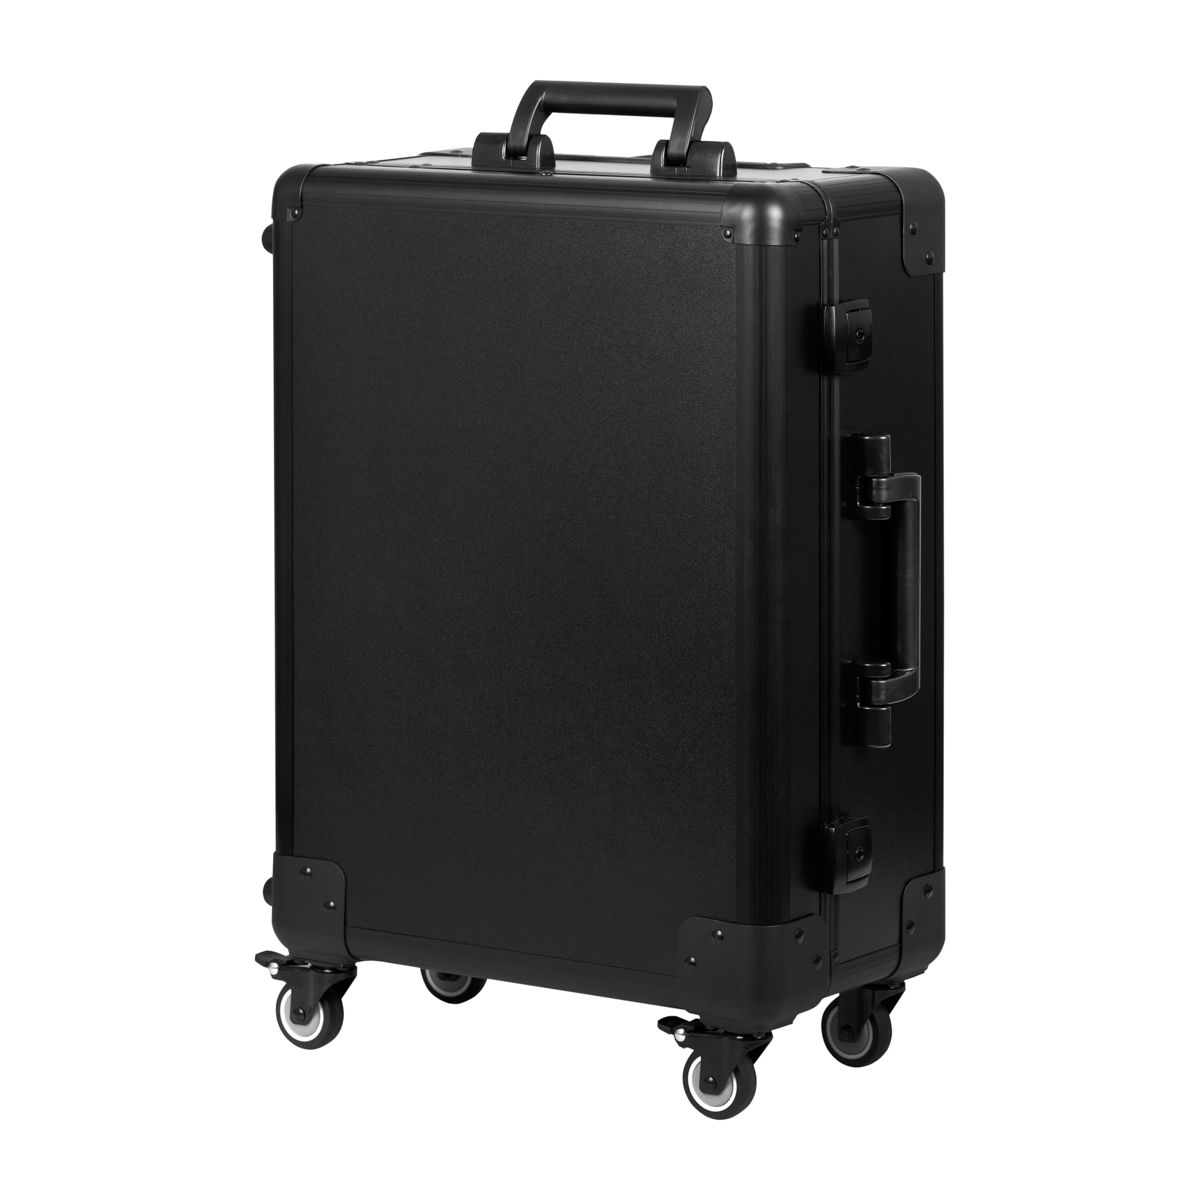 PORTABLE SUITCASE STAND T-27 BLACK